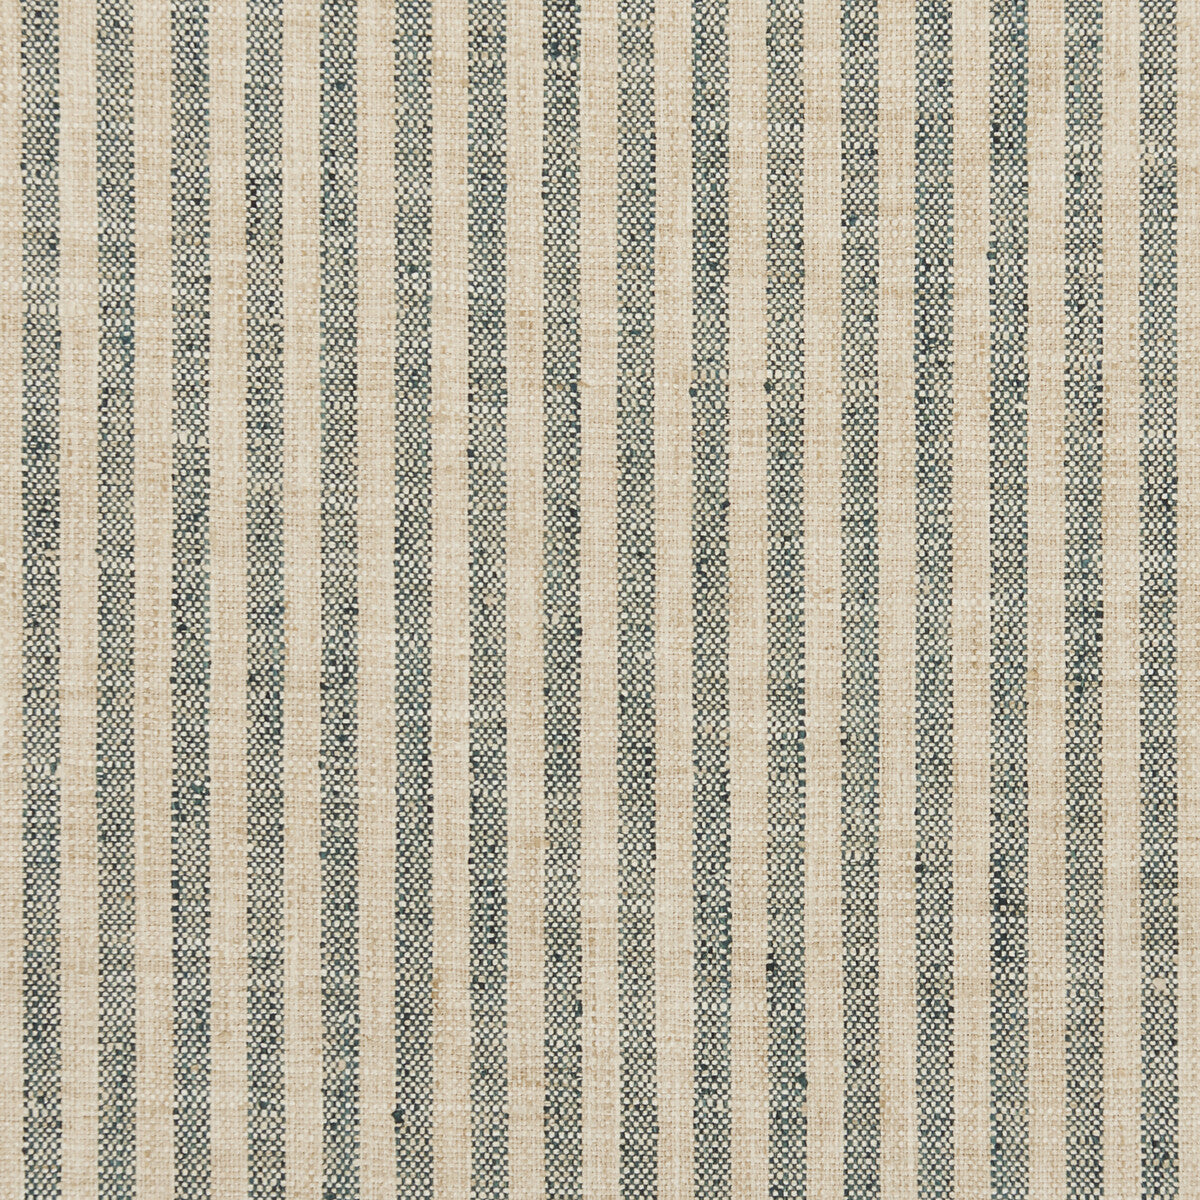 Kravet Basics fabric in 34080-316 color - pattern 34080.316.0 - by Kravet Basics in the Bungalow Chic II collection